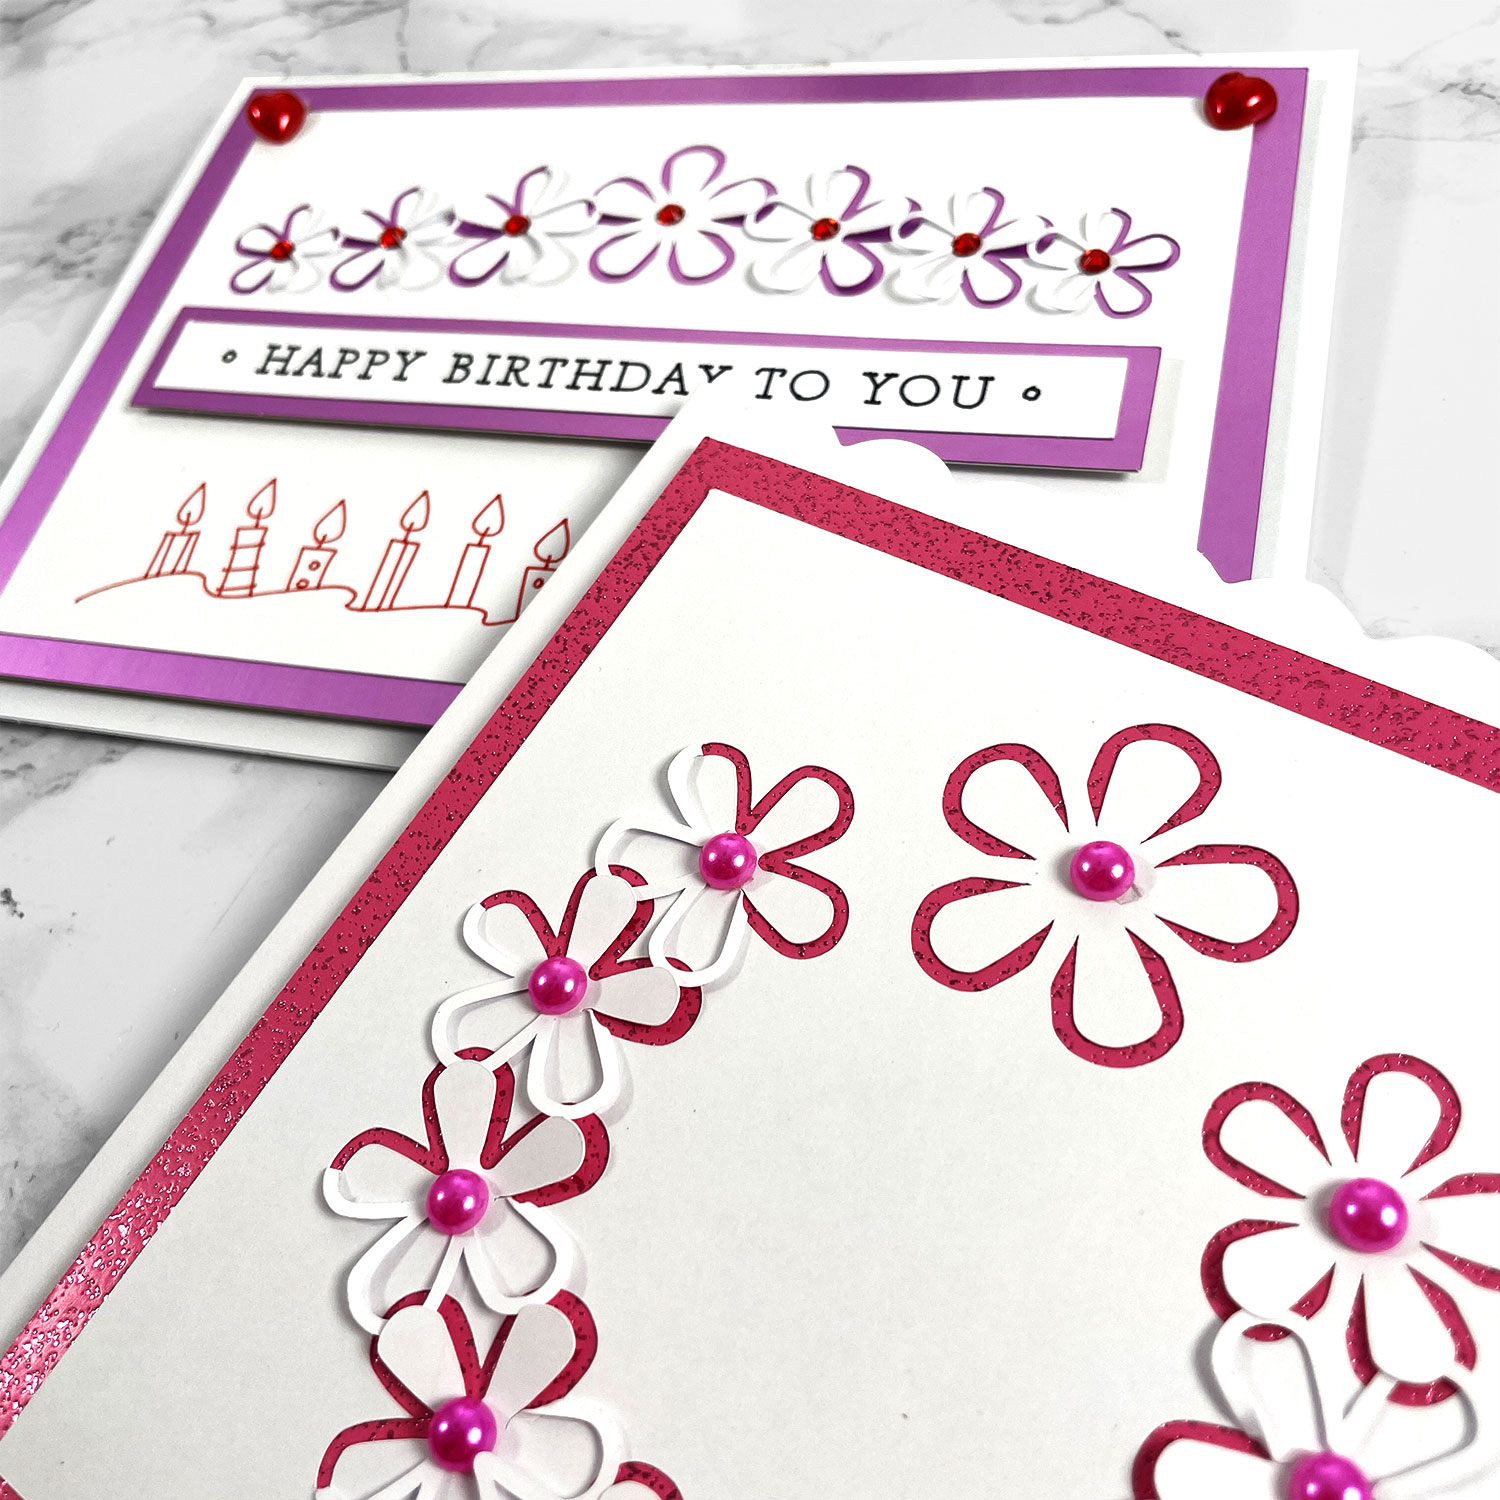 Flower cut and tuck cards